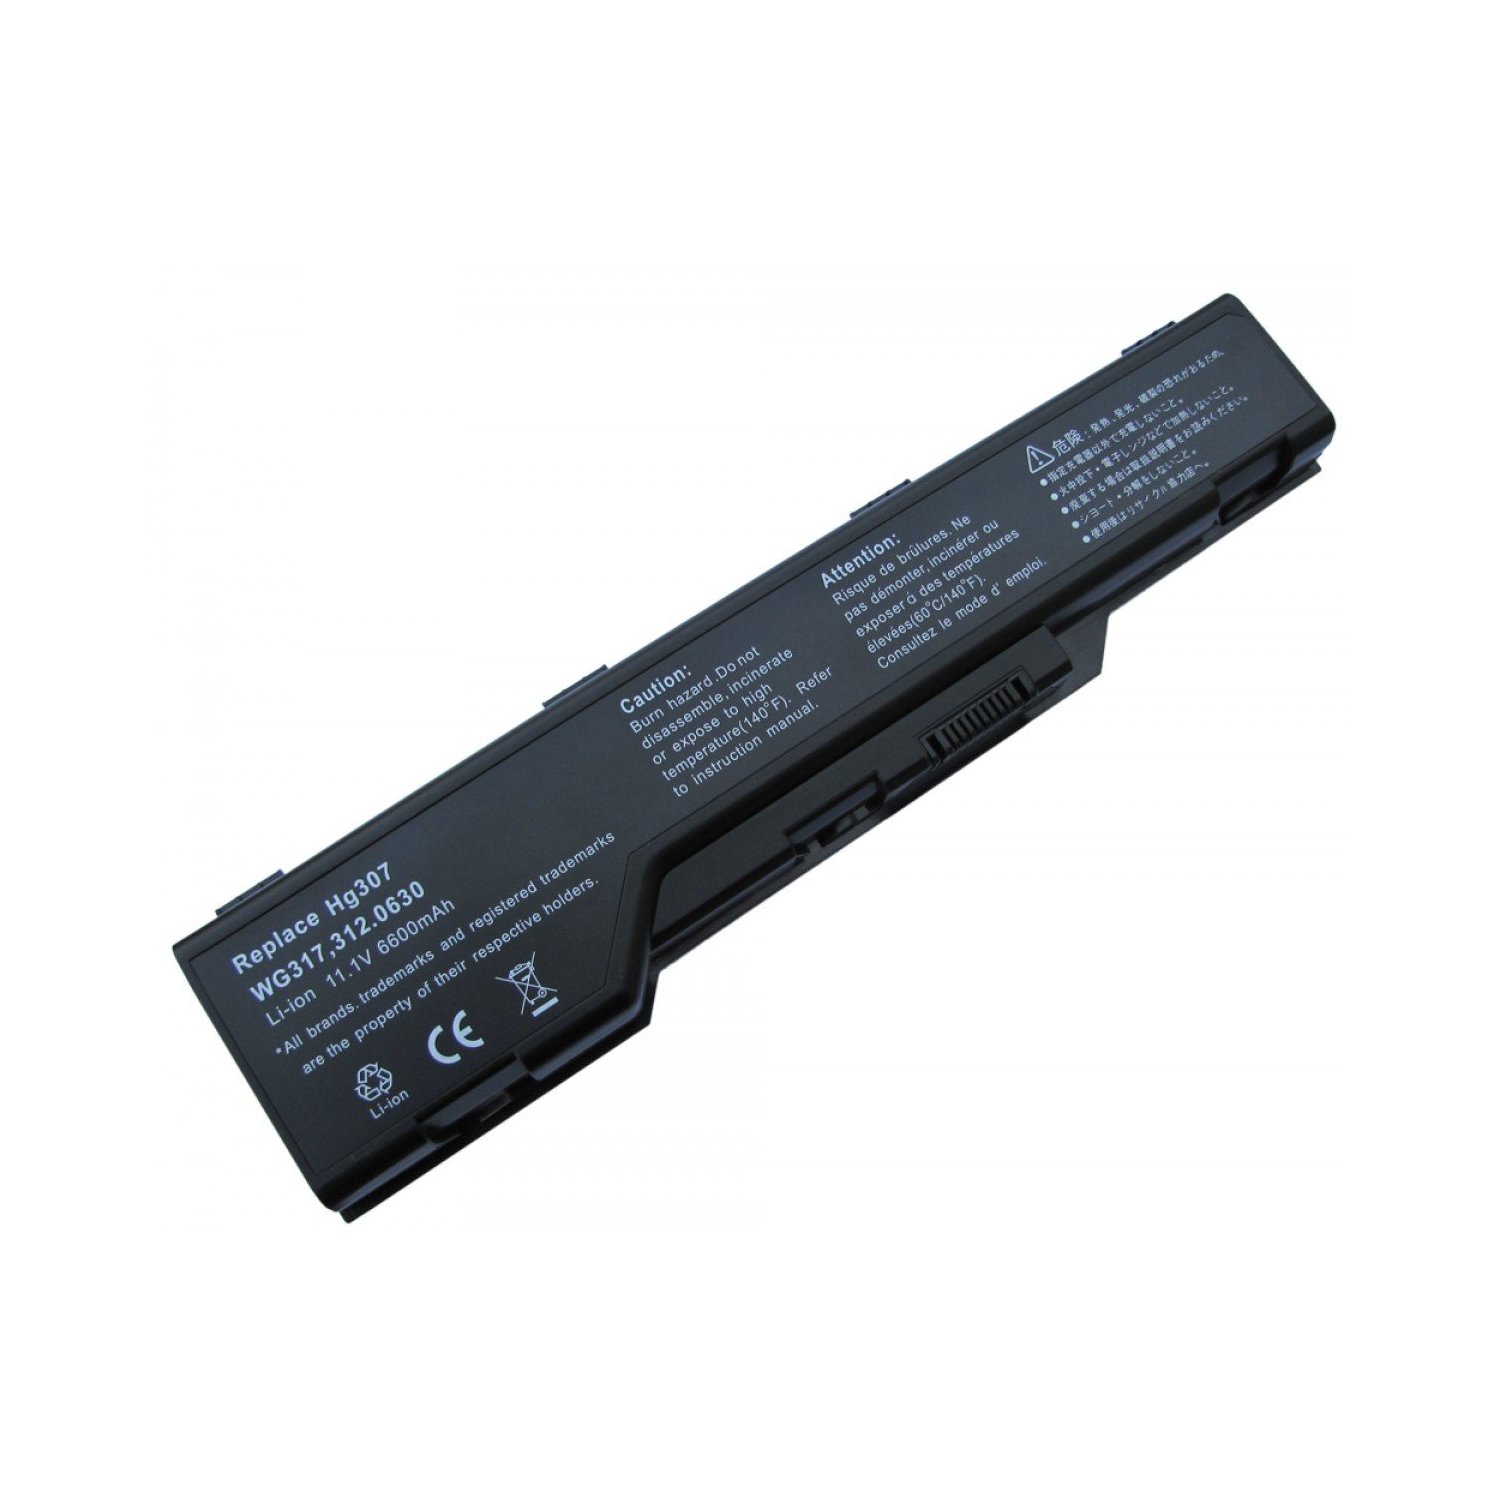 Dell-XPS M1730 Series-9 Cell: Laptop Battery 9-cell compatible with DELL XPS M1730 Replacement for HG307 XG510 0XG510 WG317 312-0680